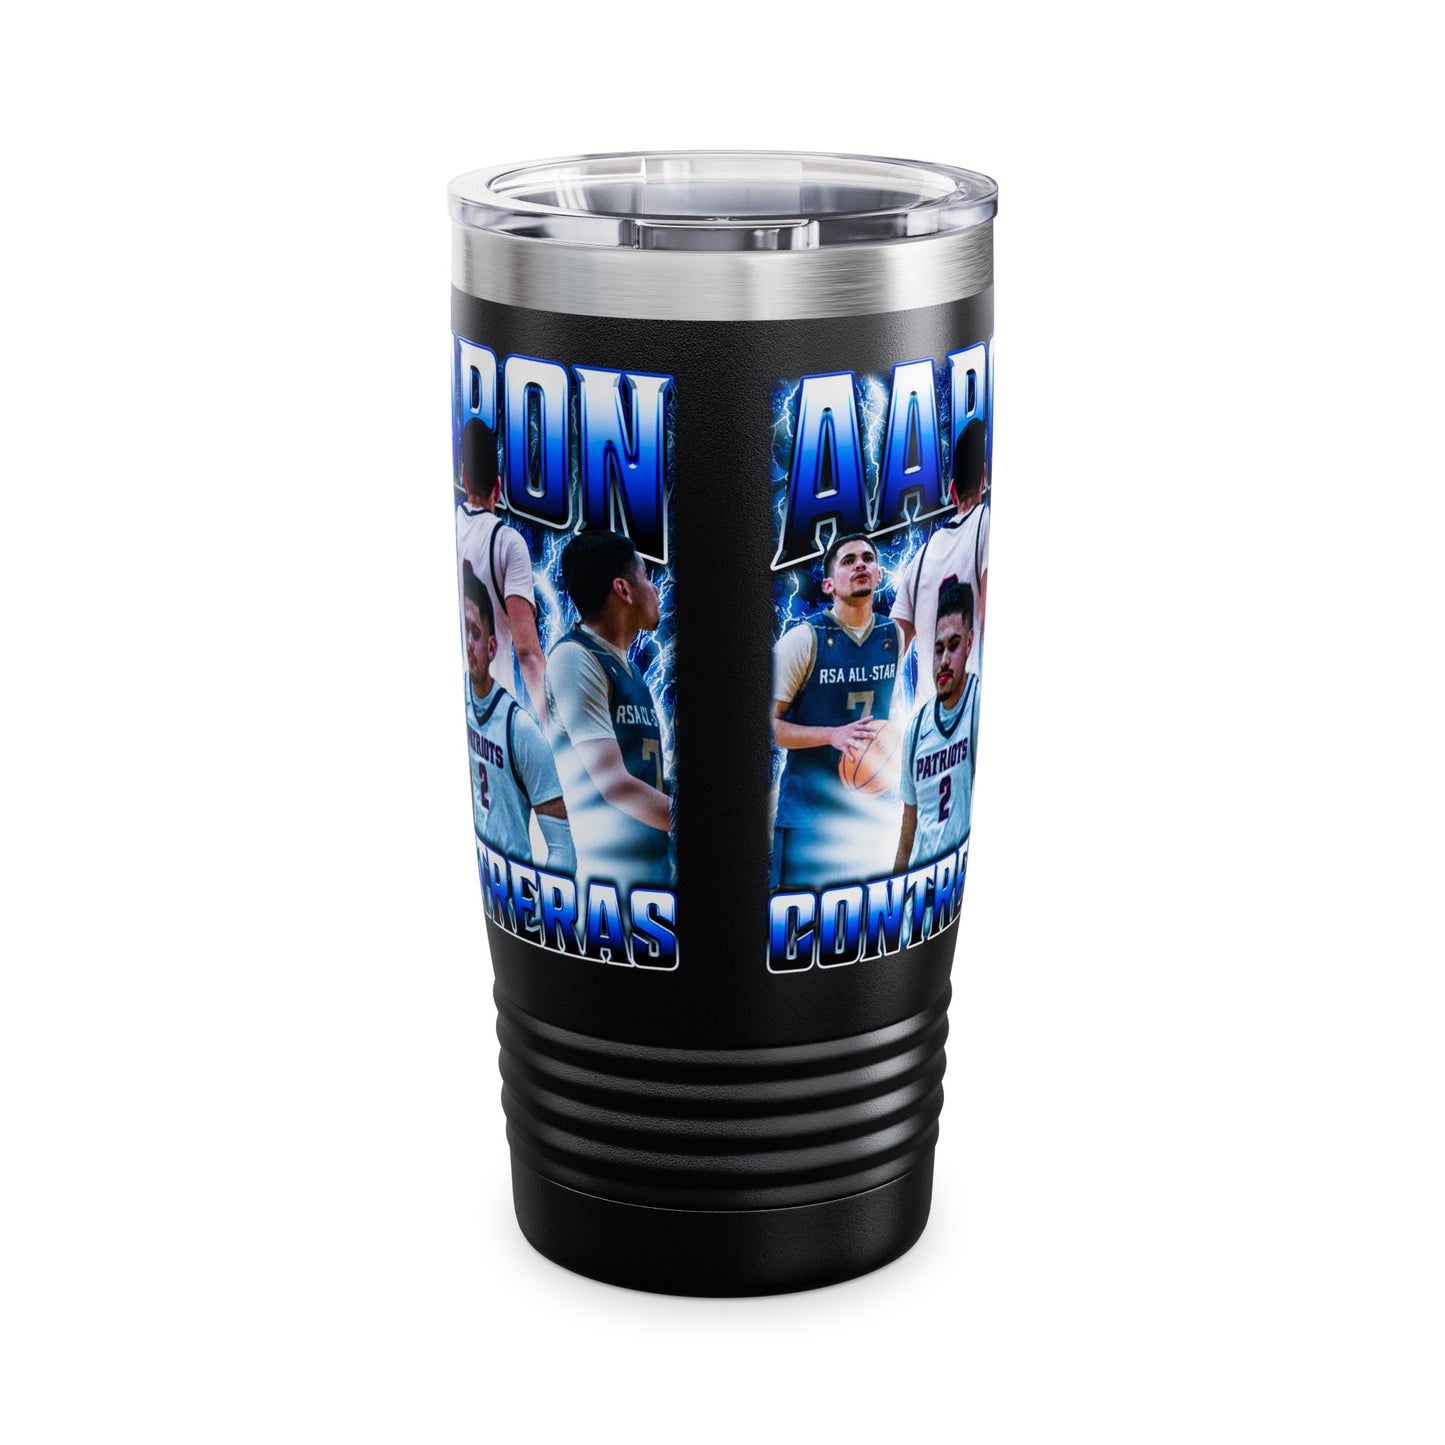 Aaron Contreras Stainless Steal Tumbler